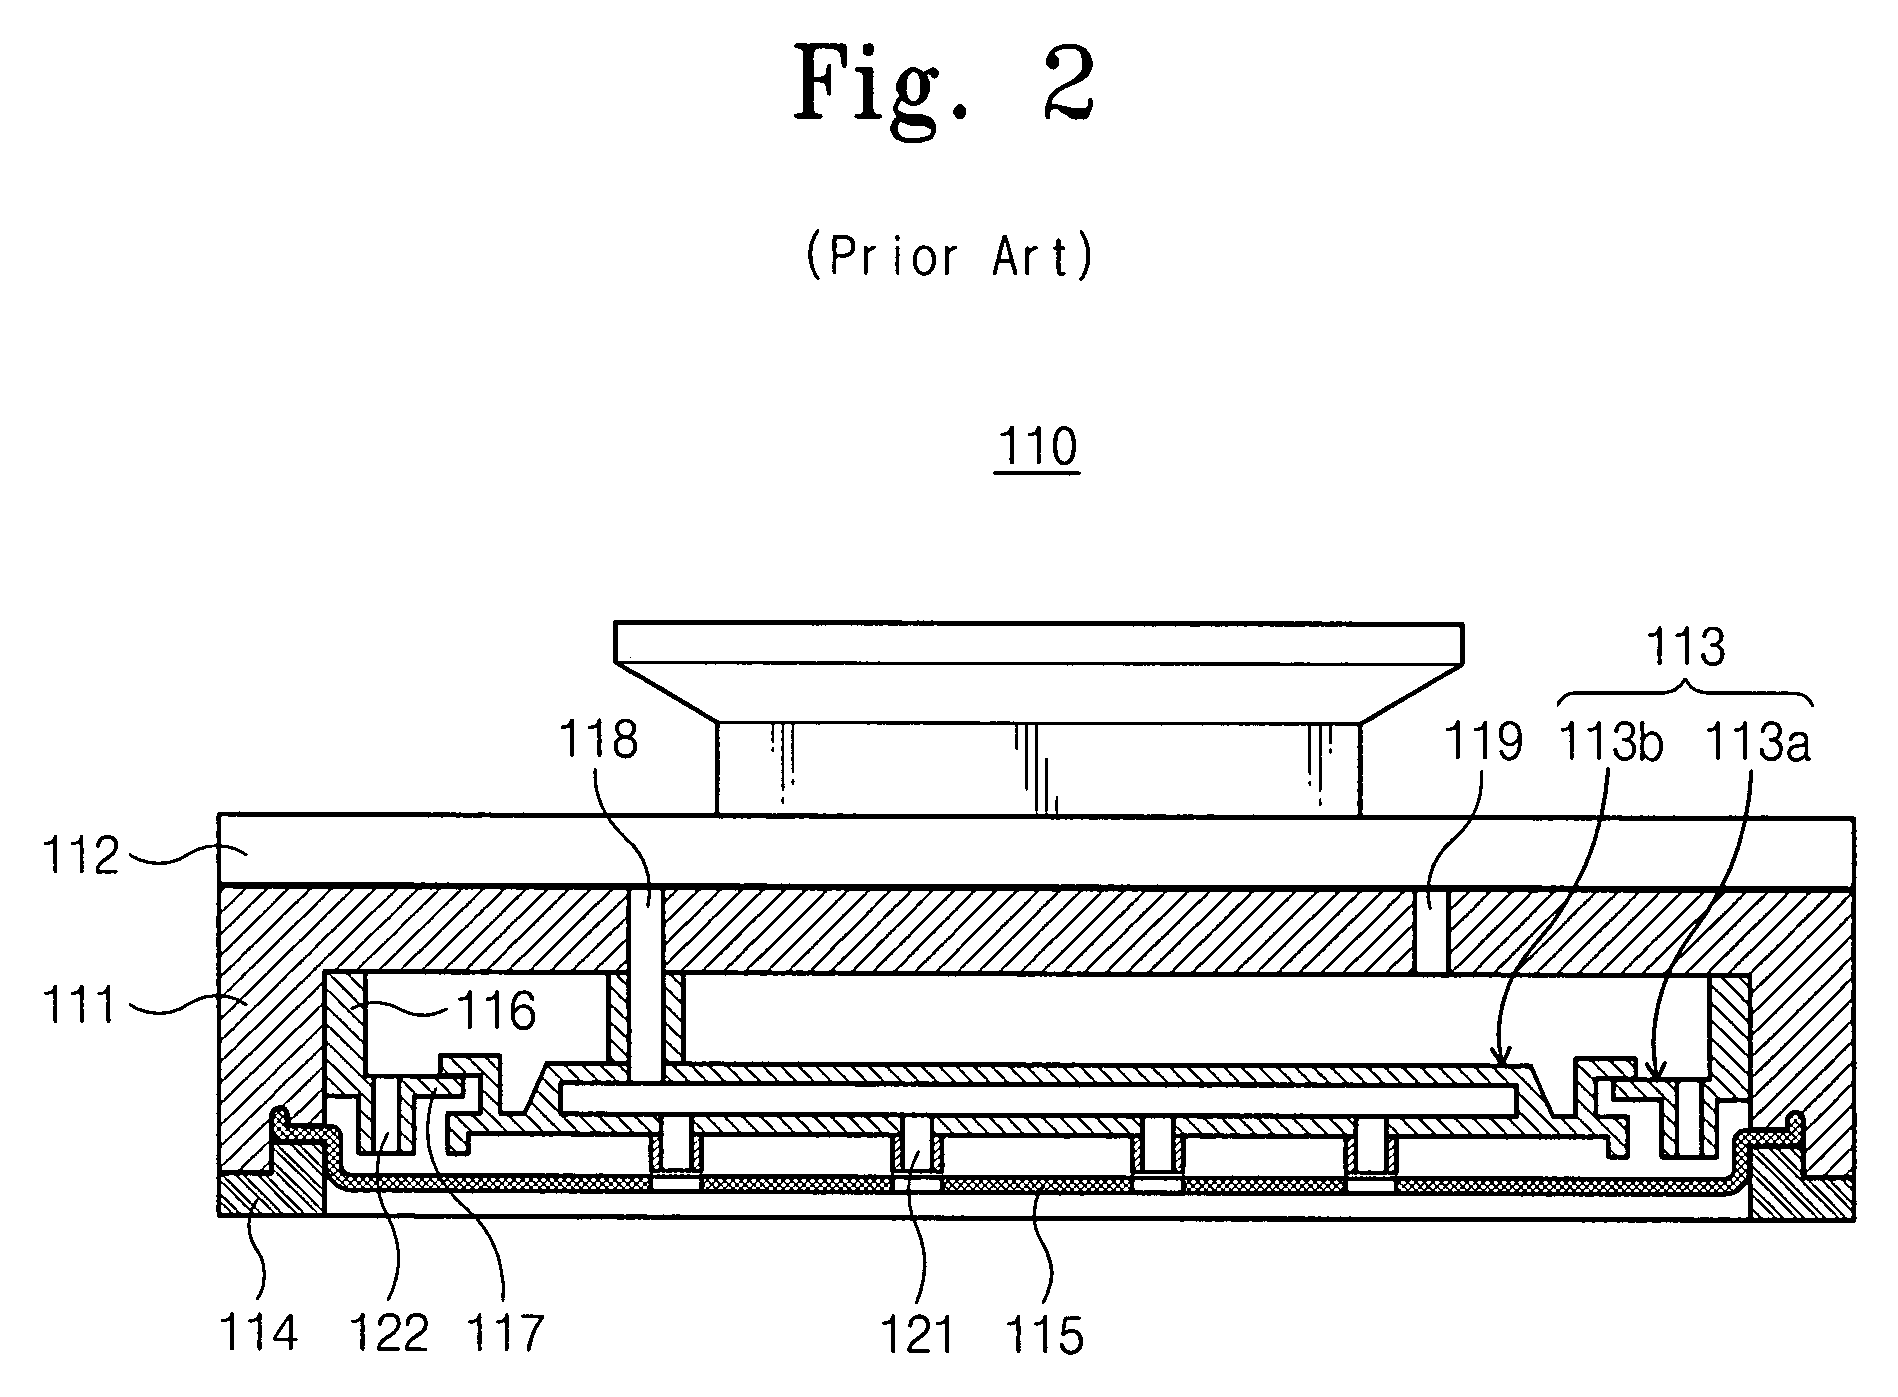 Chemical mechanical polishing apparatus and methods using a polishing surface with non-uniform rigidity